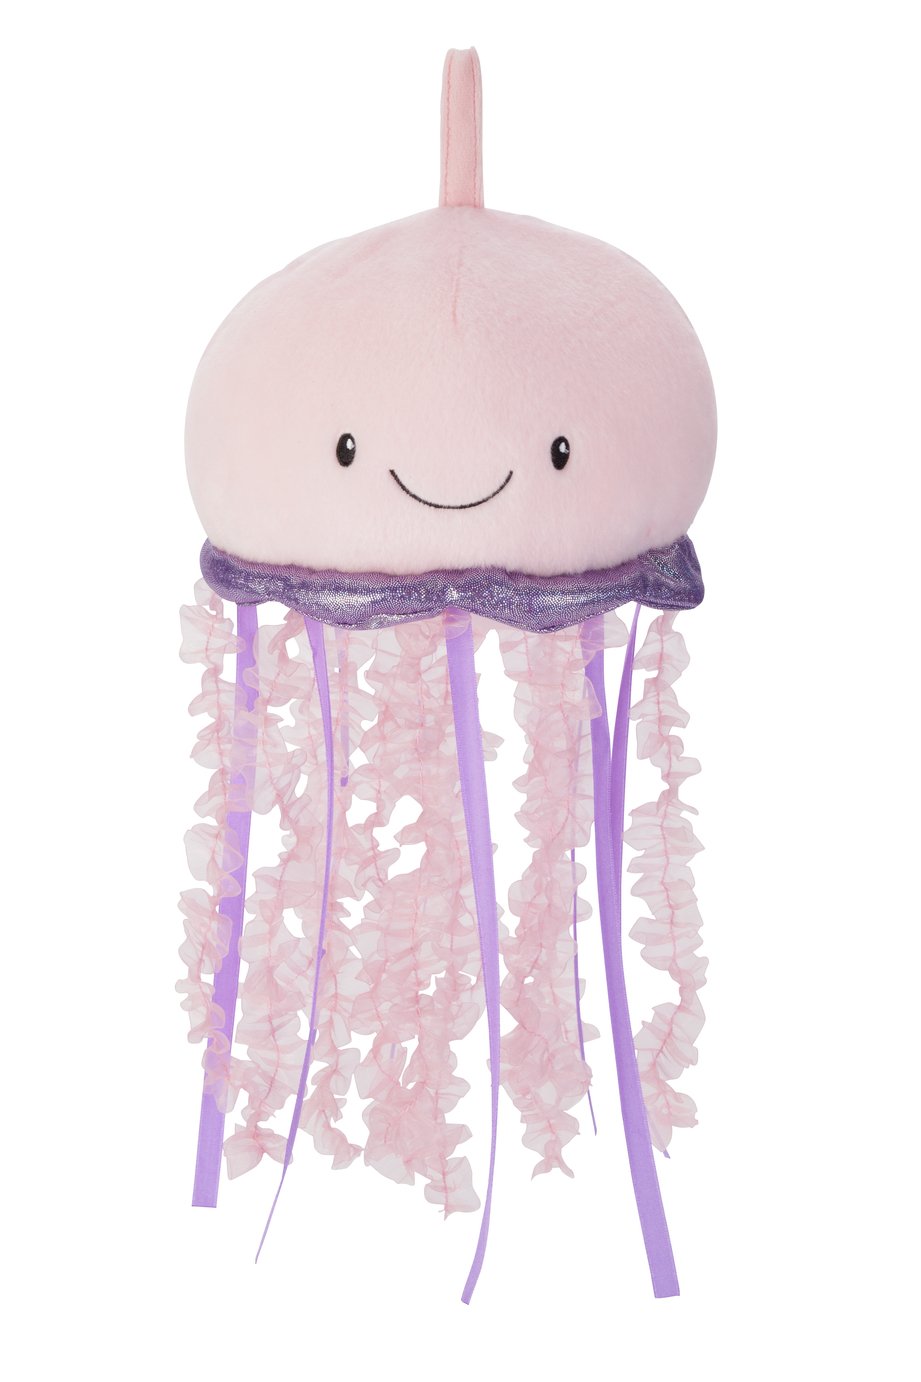 Light & Sound Jellyfish Soft Toy Review